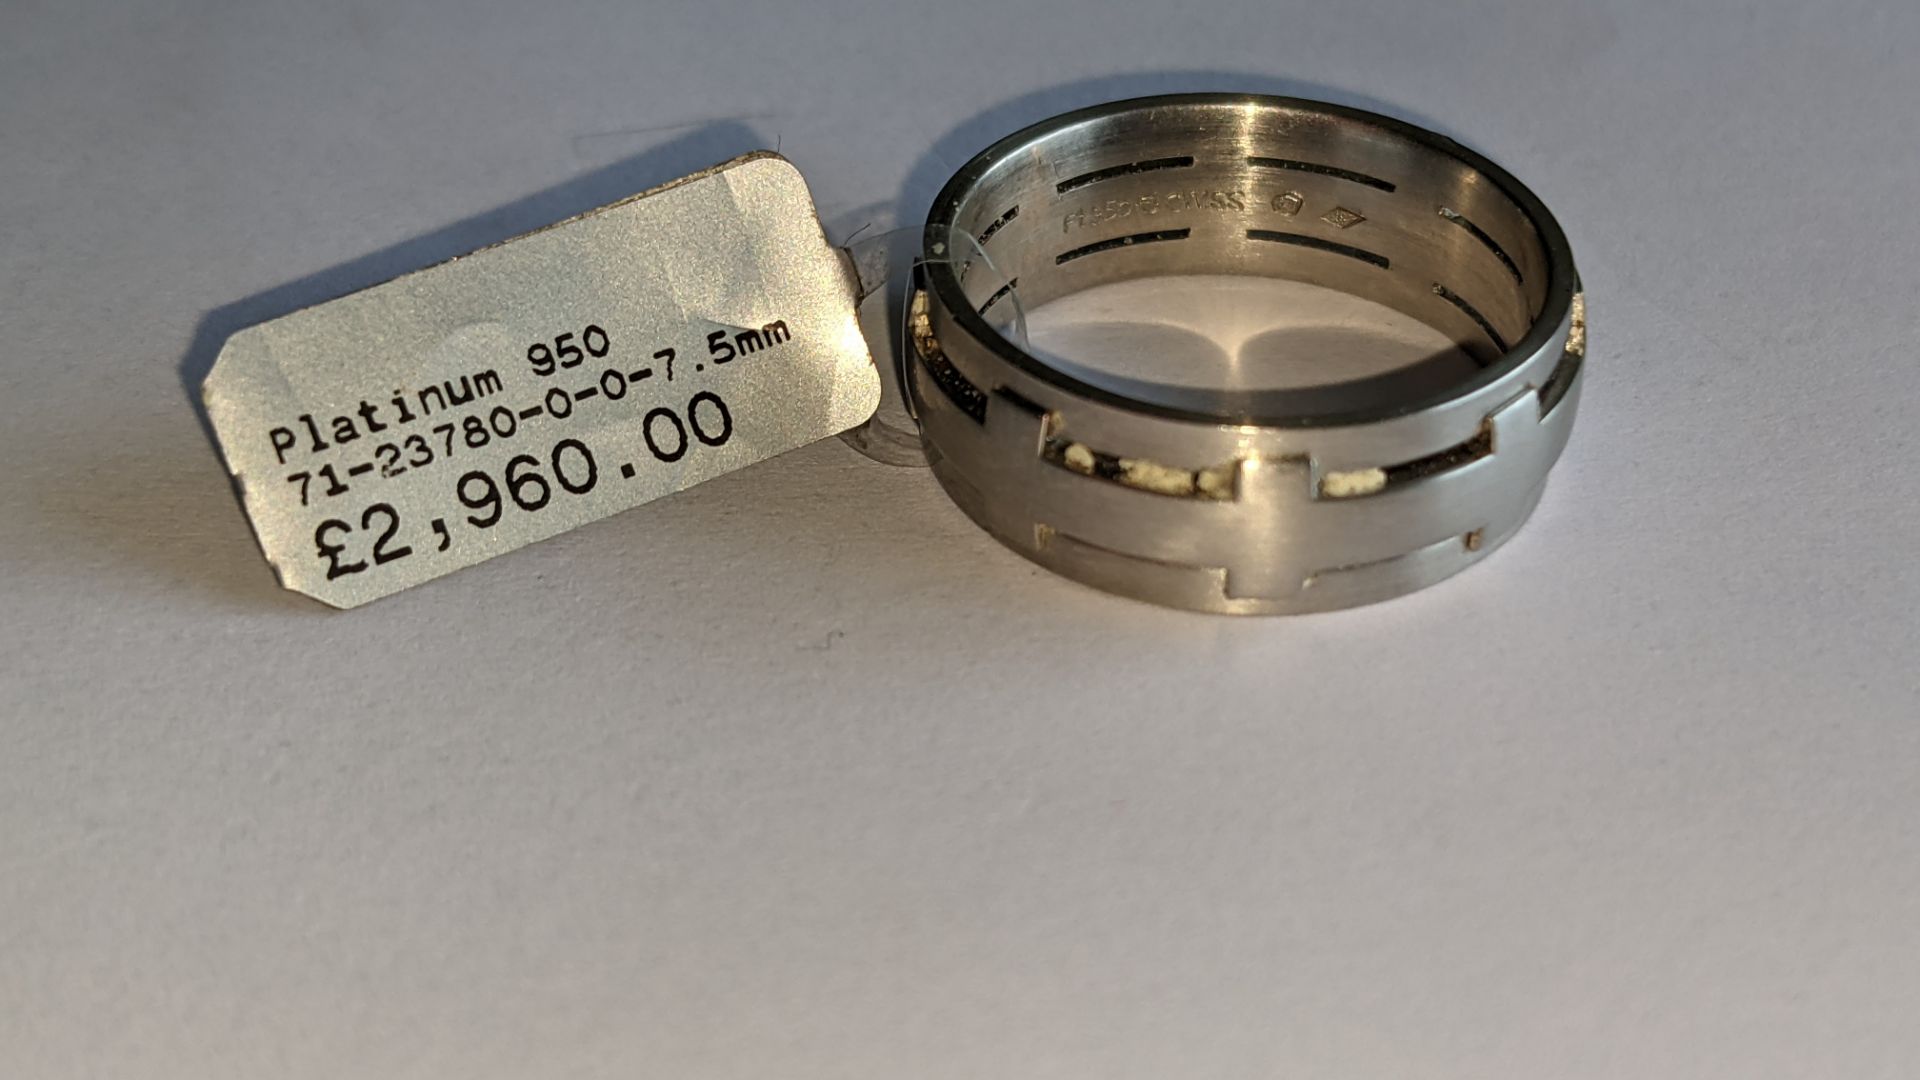 Platinum 950 ring in matt & polished finish, 7.5mm wide. RRP £2,960 - Image 6 of 15